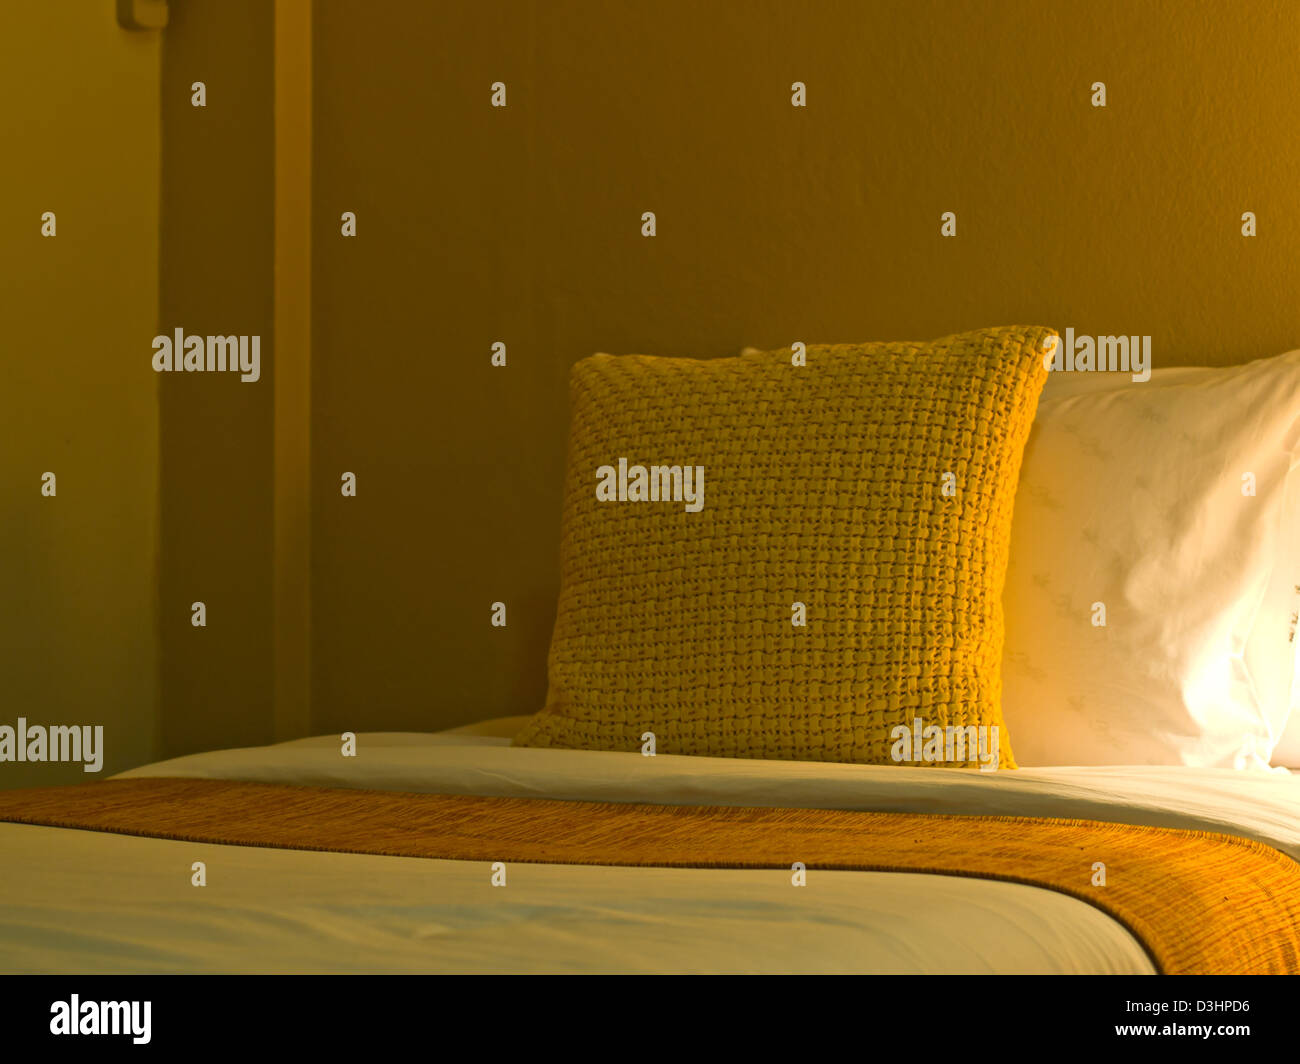 A design yellow pillow in a modern style bedroom interior with warm light Stock Photo